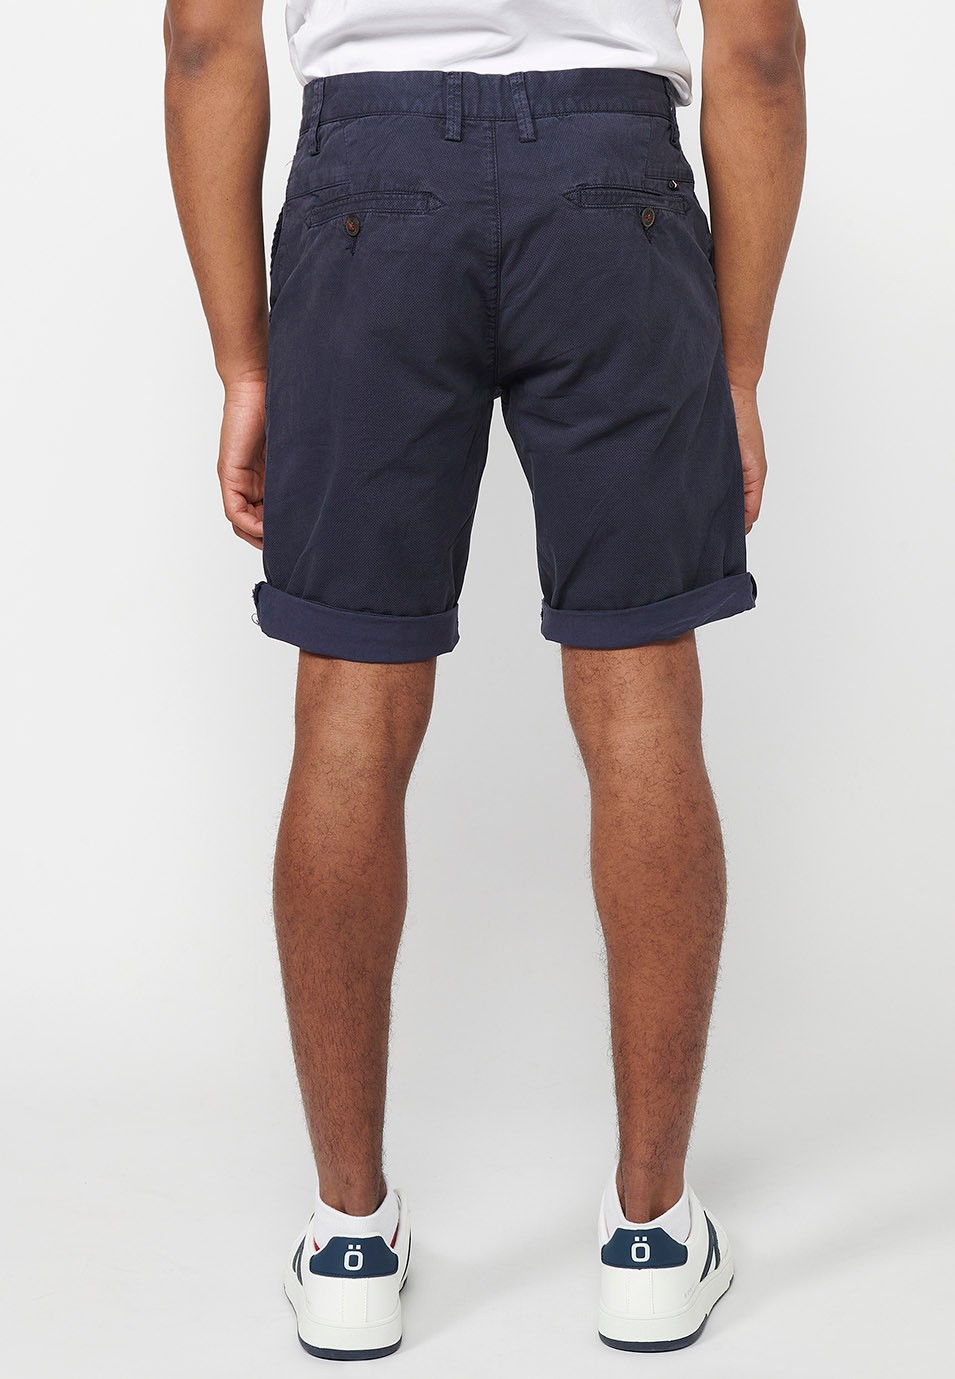 Bermuda Chino shorts with turn-up finish with front zipper and button closure with four pockets in Navy Color for Men 2